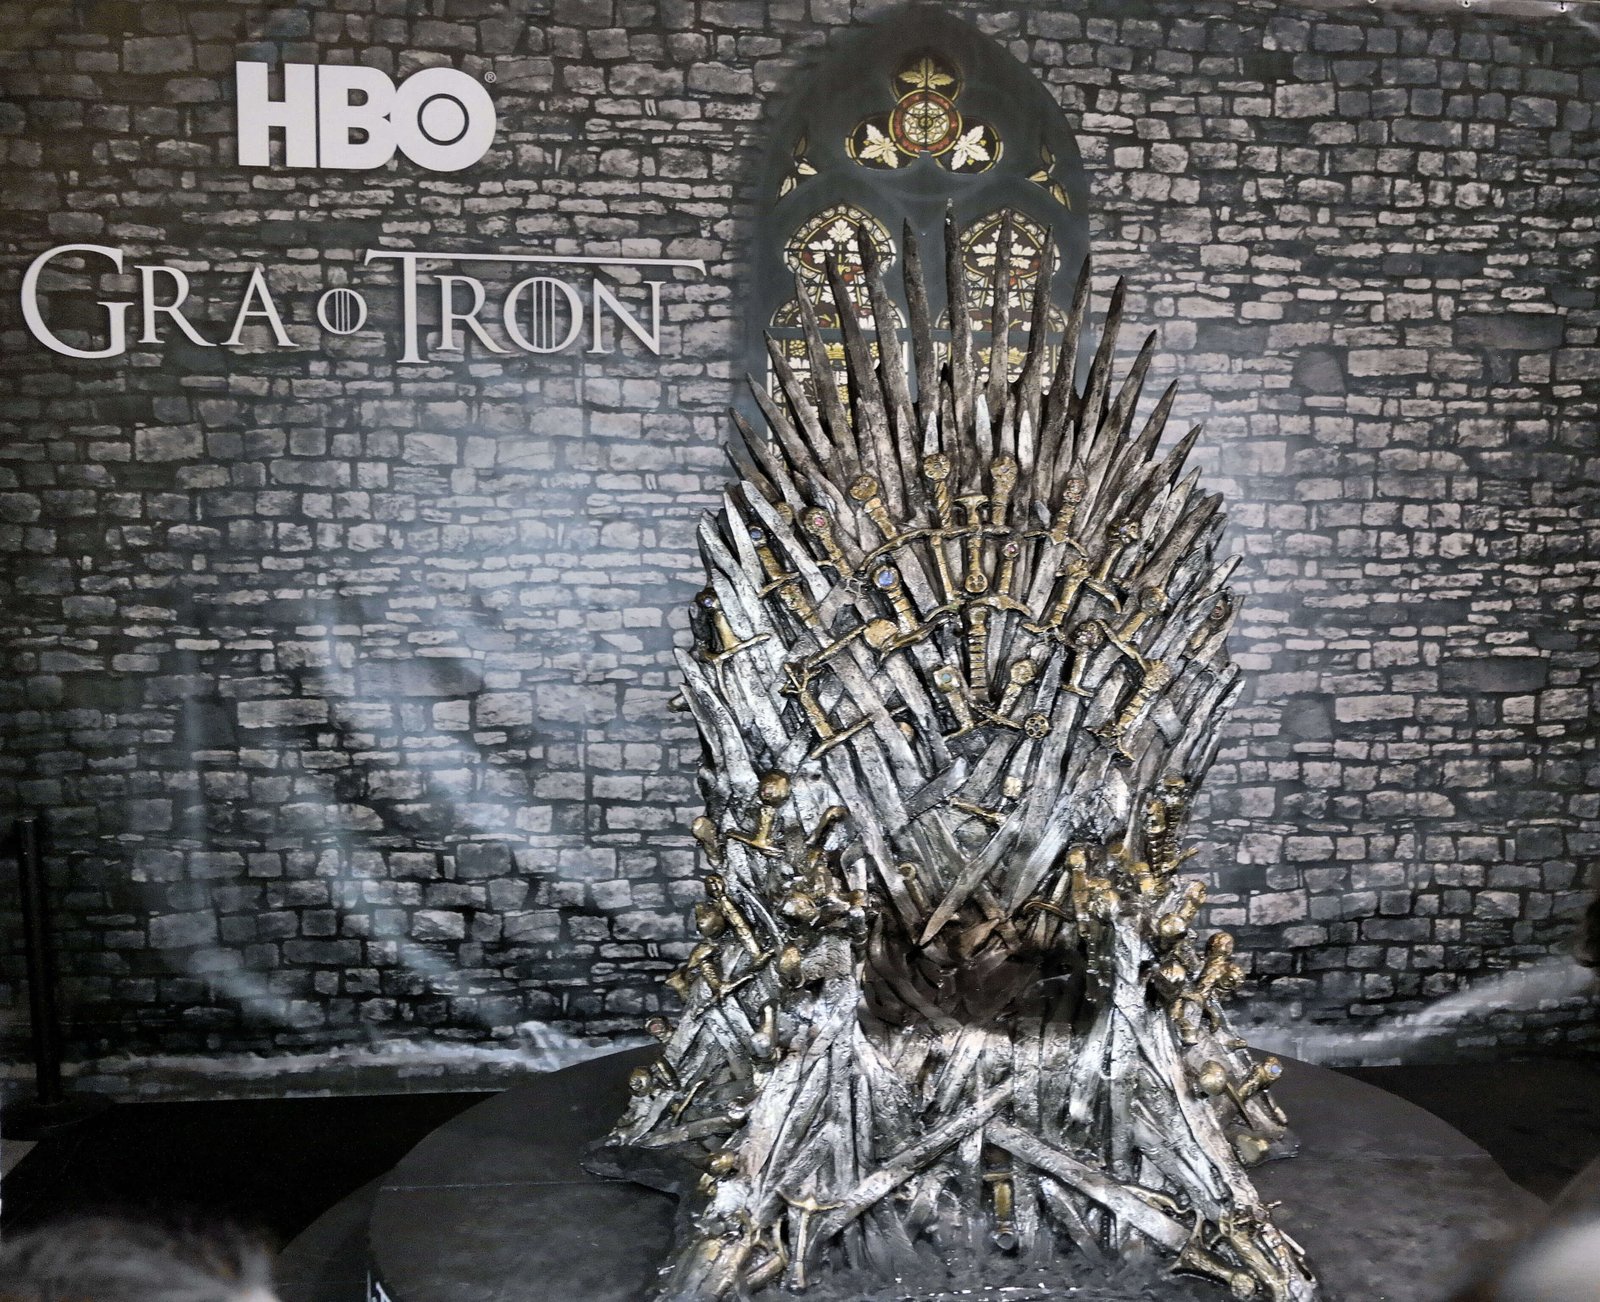 Amazon Prime HBO Game Of Thrones Now available for Amazon video users